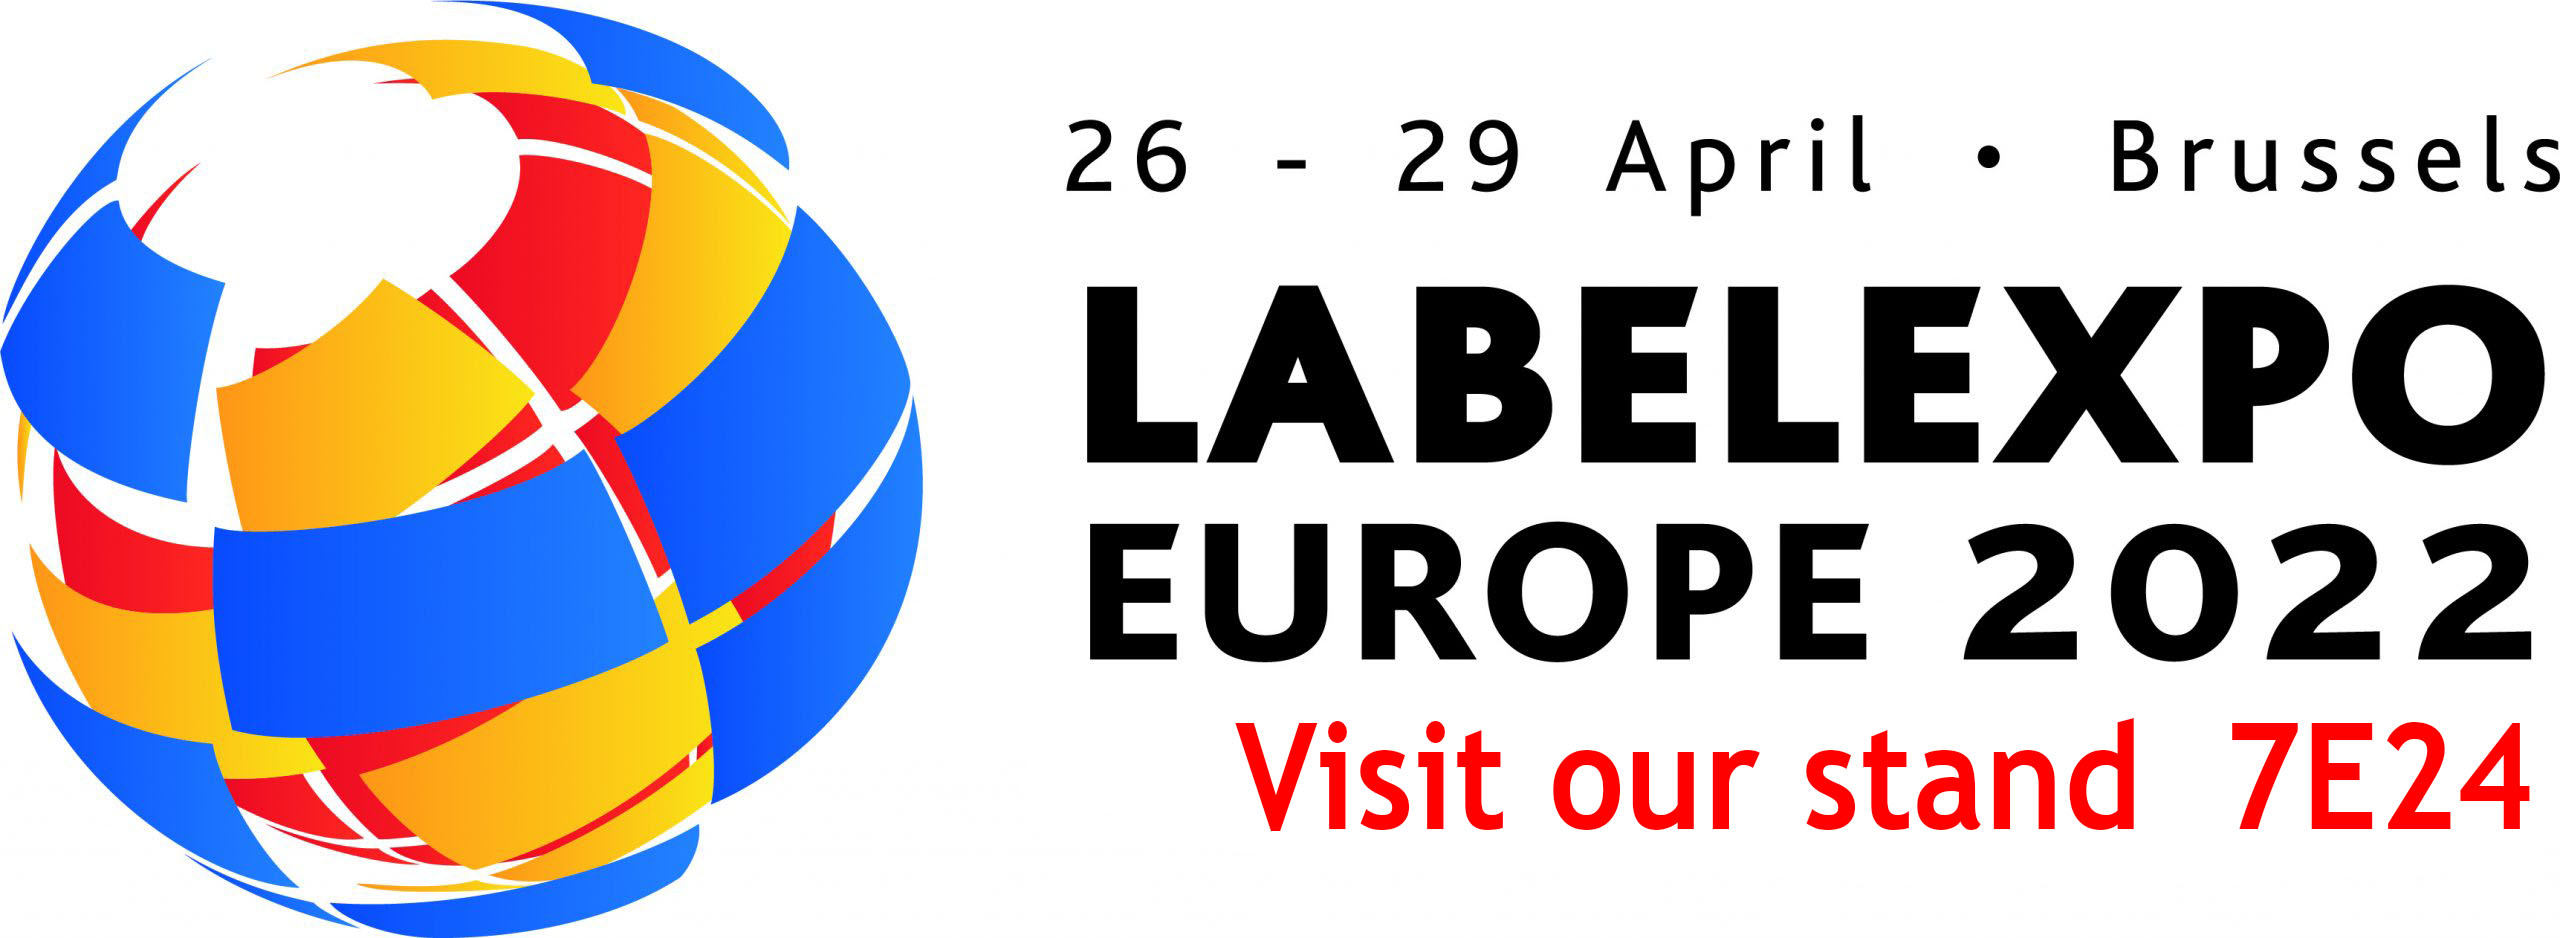 Label expo 2022 IN